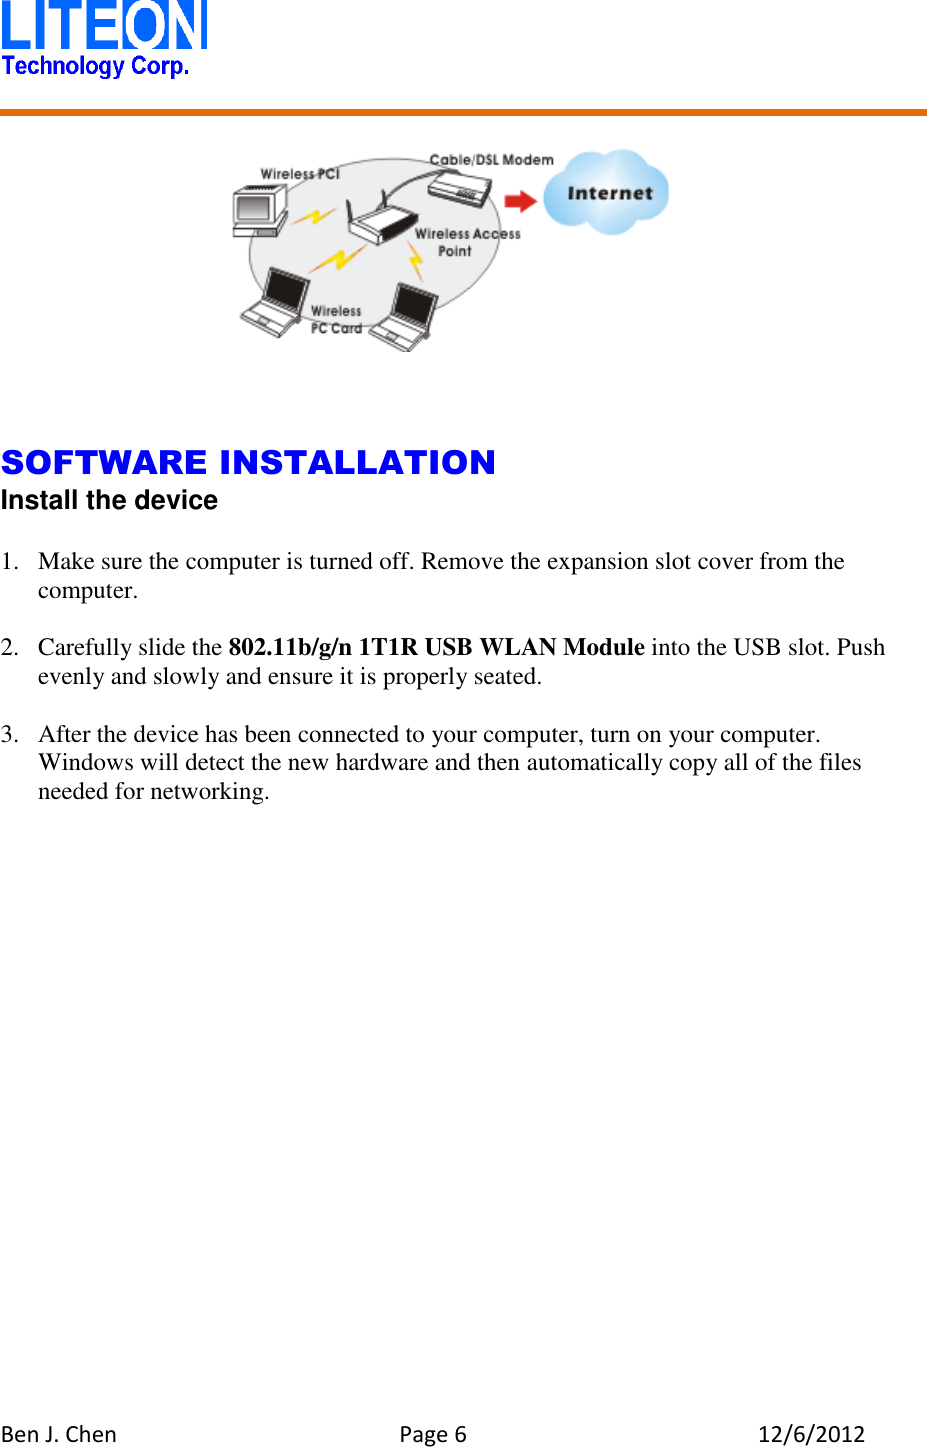   Ben J. Chen  Page 6  12/6/2012         SOFTWARE INSTALLATION Install the device  1. Make sure the computer is turned off. Remove the expansion slot cover from the computer.  2. Carefully slide the 802.11b/g/n 1T1R USB WLAN Module into the USB slot. Push evenly and slowly and ensure it is properly seated.  3. After the device has been connected to your computer, turn on your computer. Windows will detect the new hardware and then automatically copy all of the files needed for networking.  